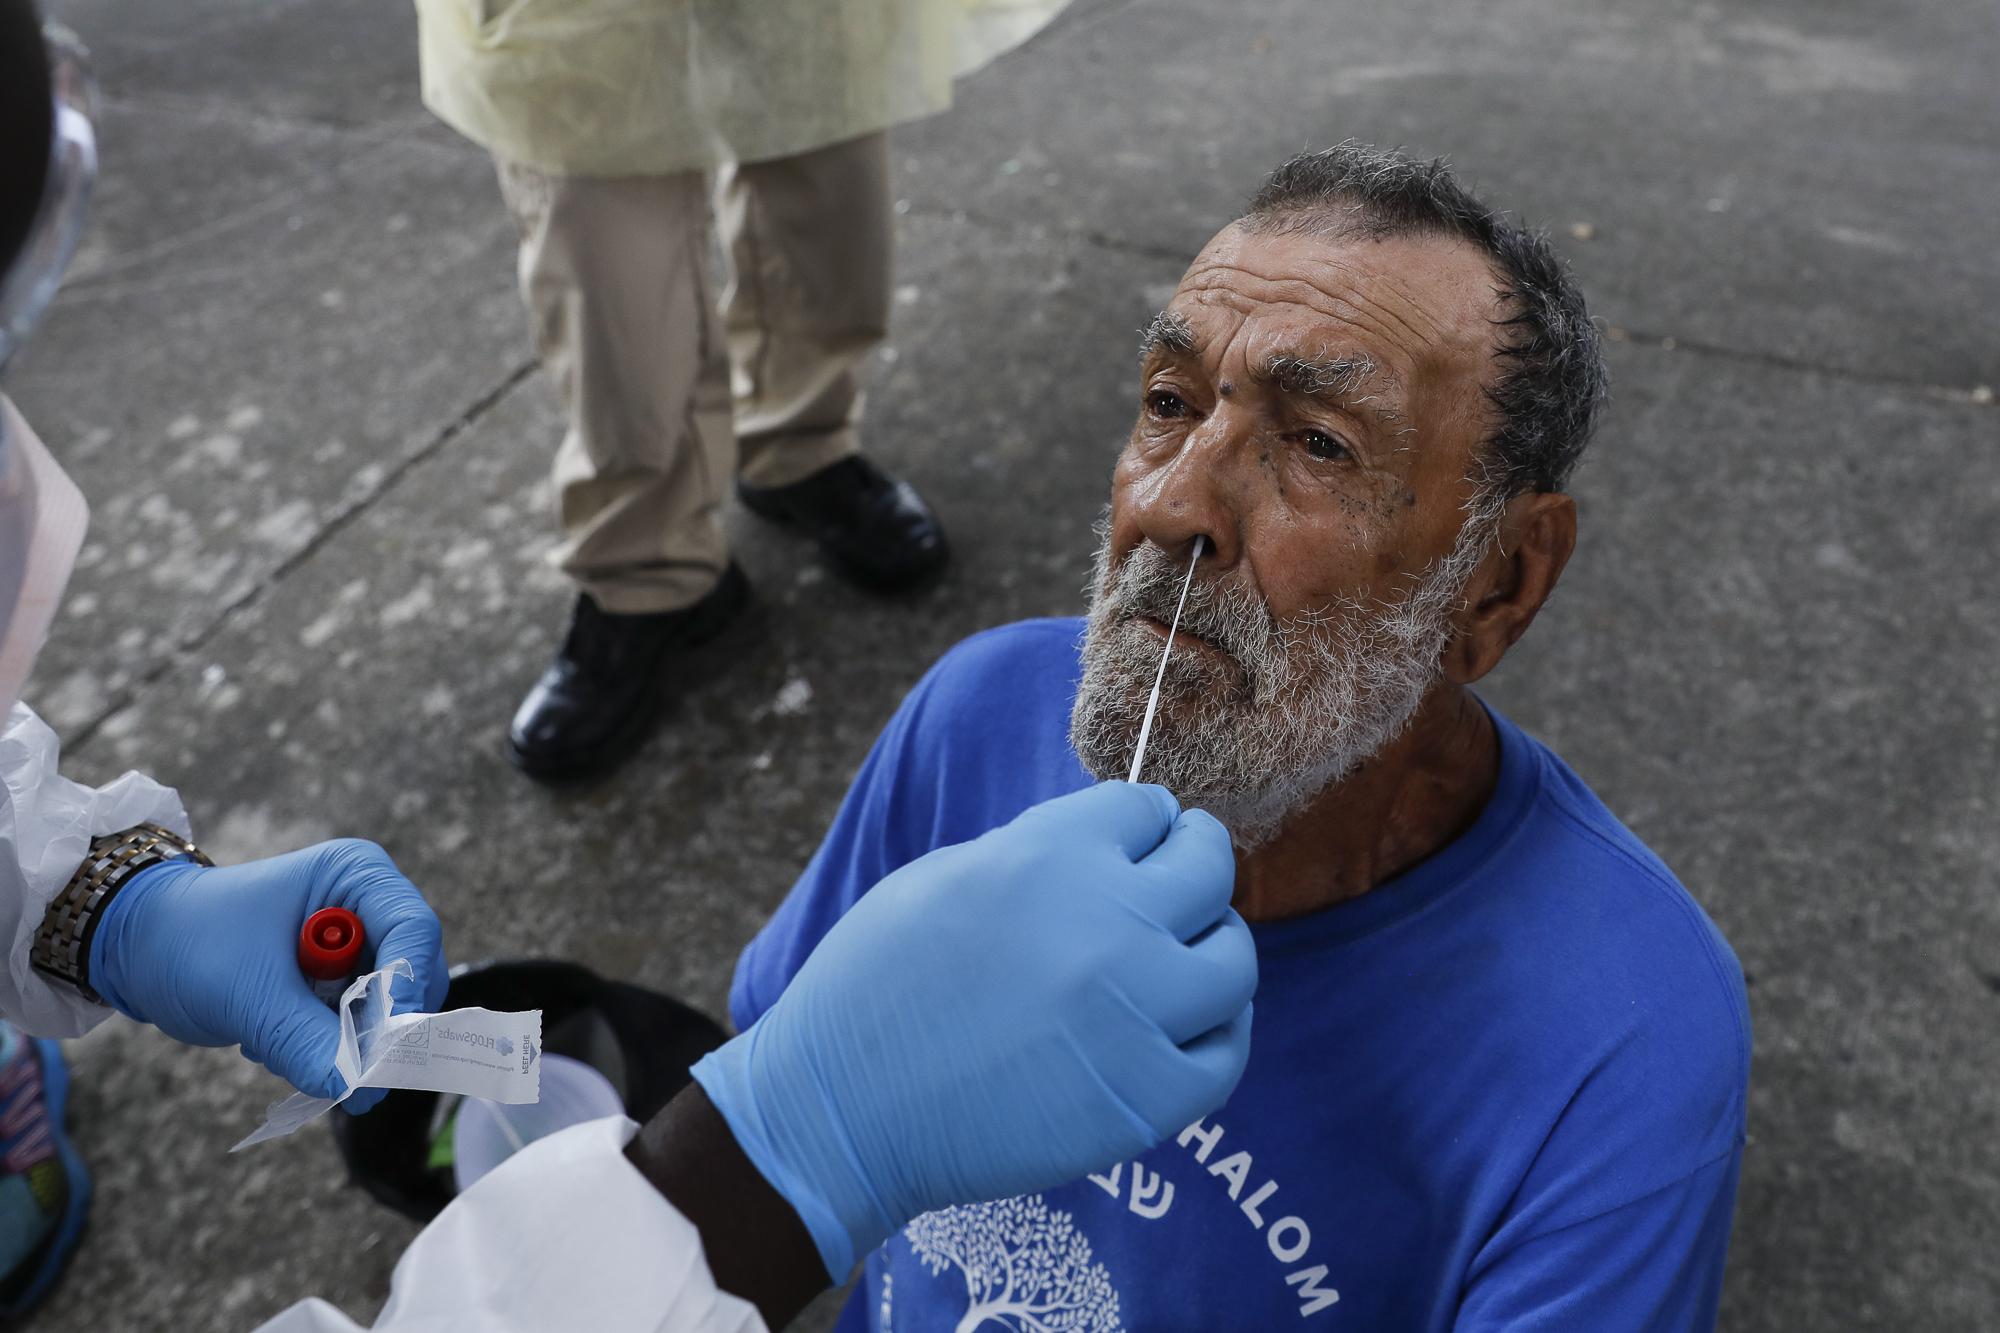 Miami-Dade County testing operation for the coronavirus disease - A homeless man reacts as a worker uses a swab to collect...